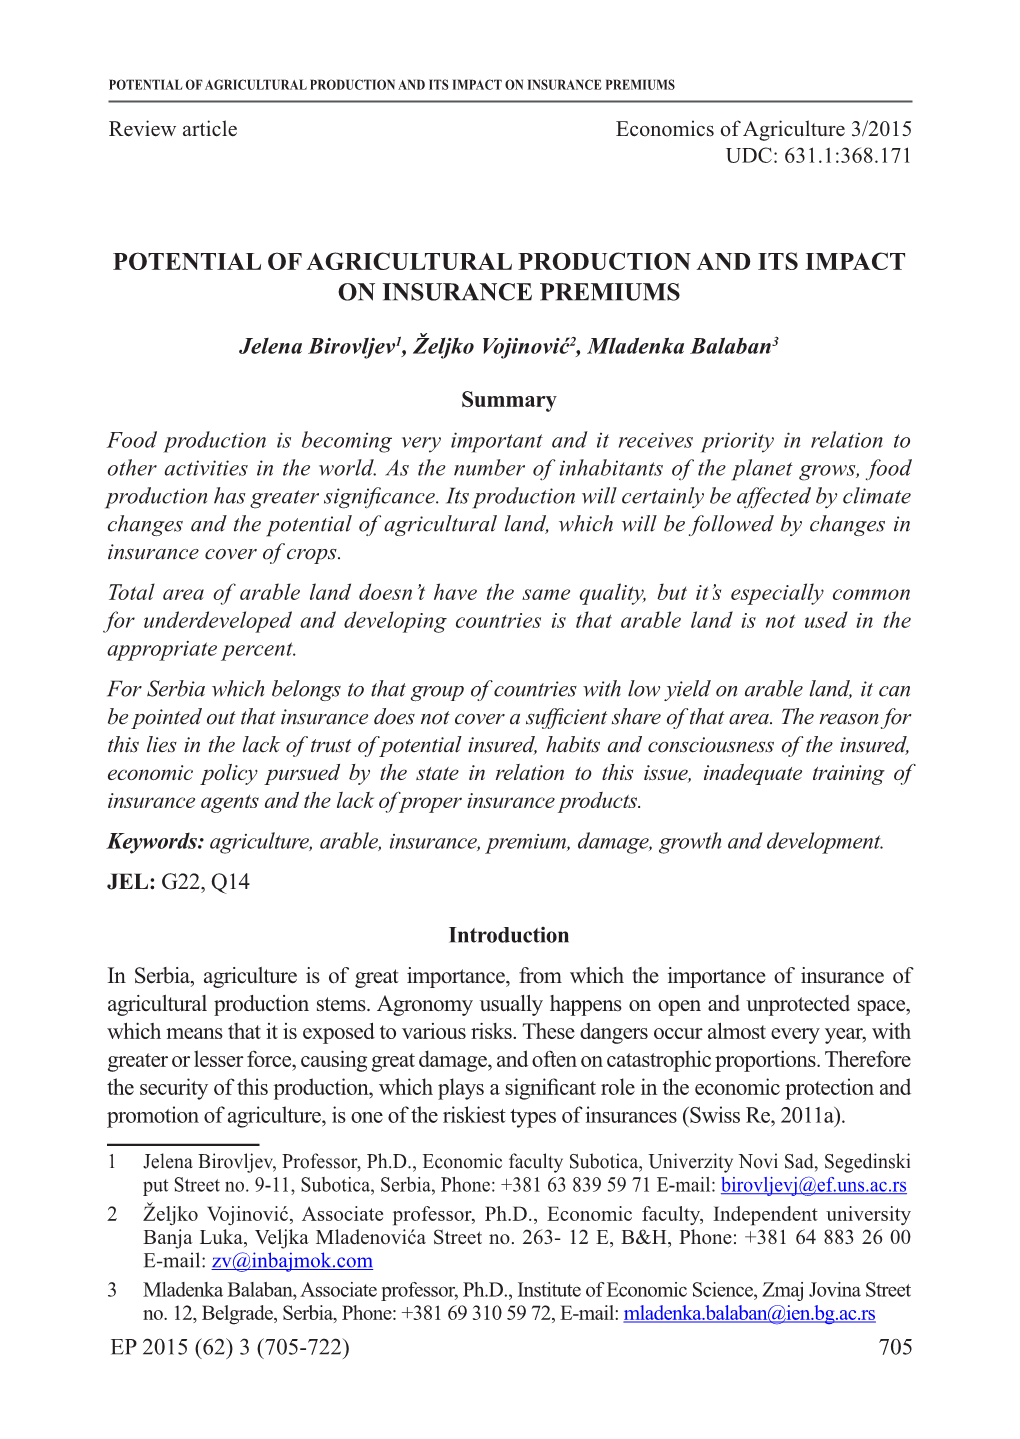 Potential of Agricultural Production and Its Impact on Insurance Premiums